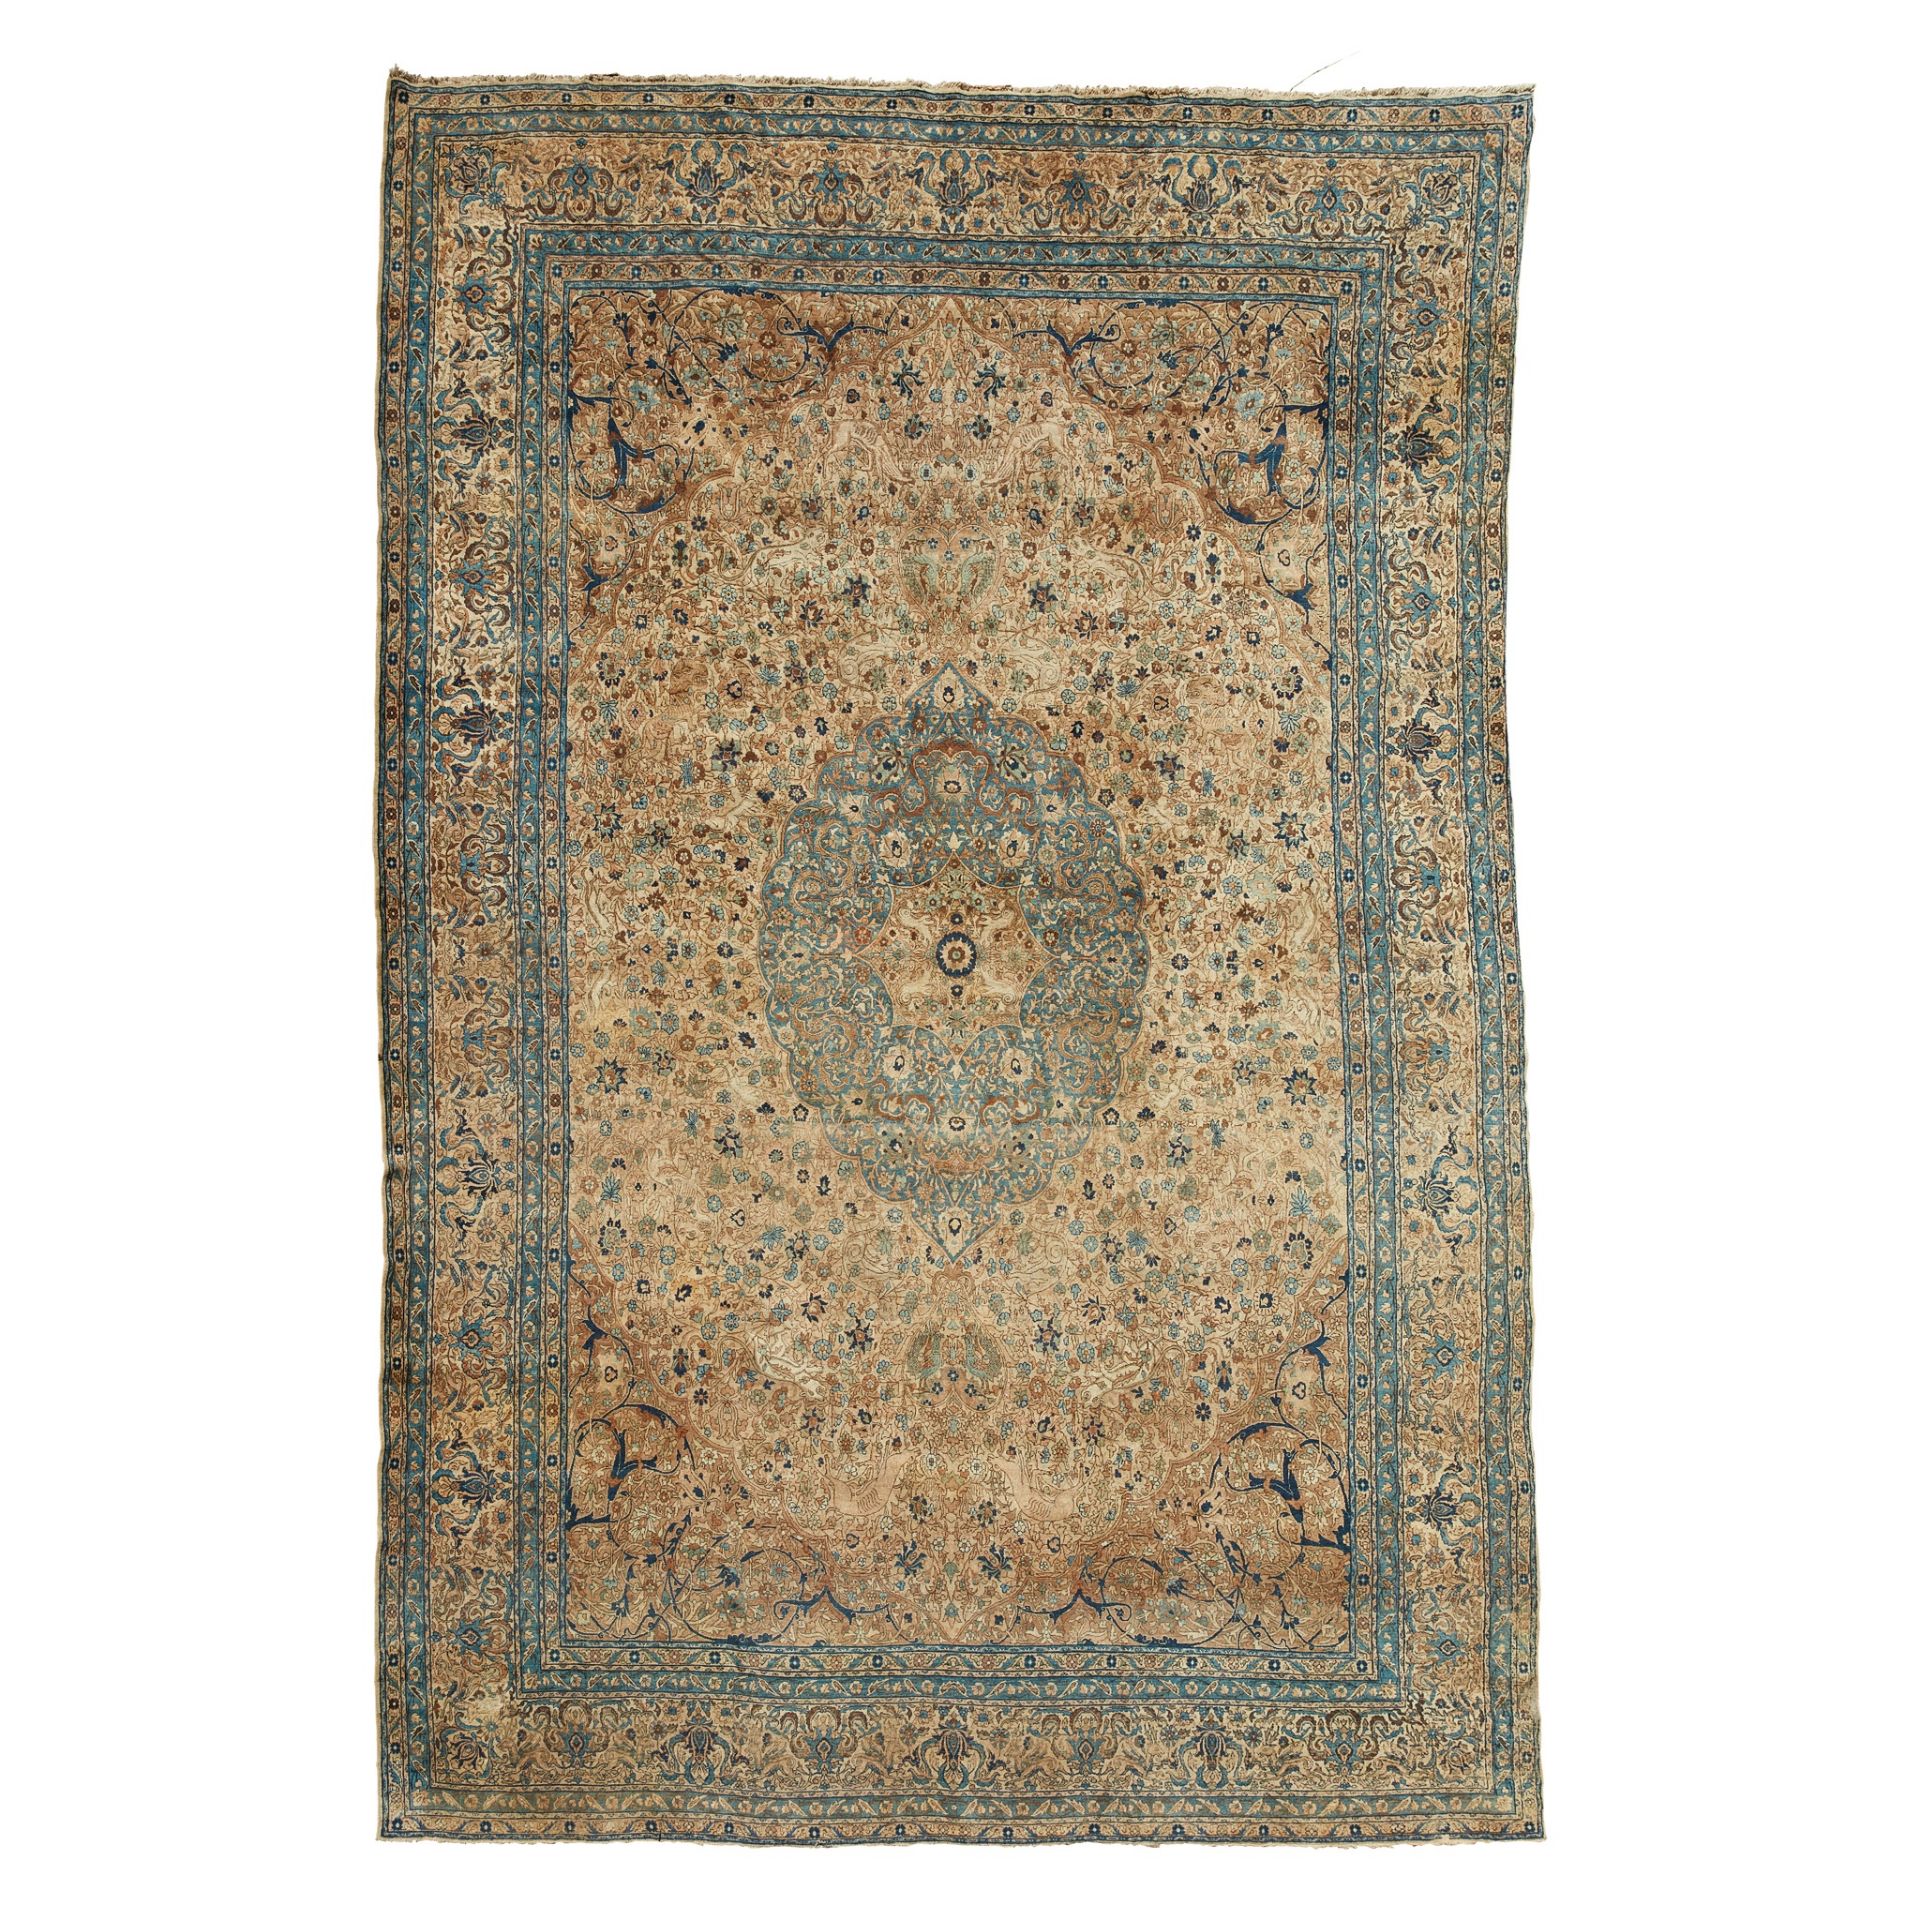 KIRMAN CARPET CENTRAL PERSIA, LATE 19TH/EARLY 20TH CENTURY